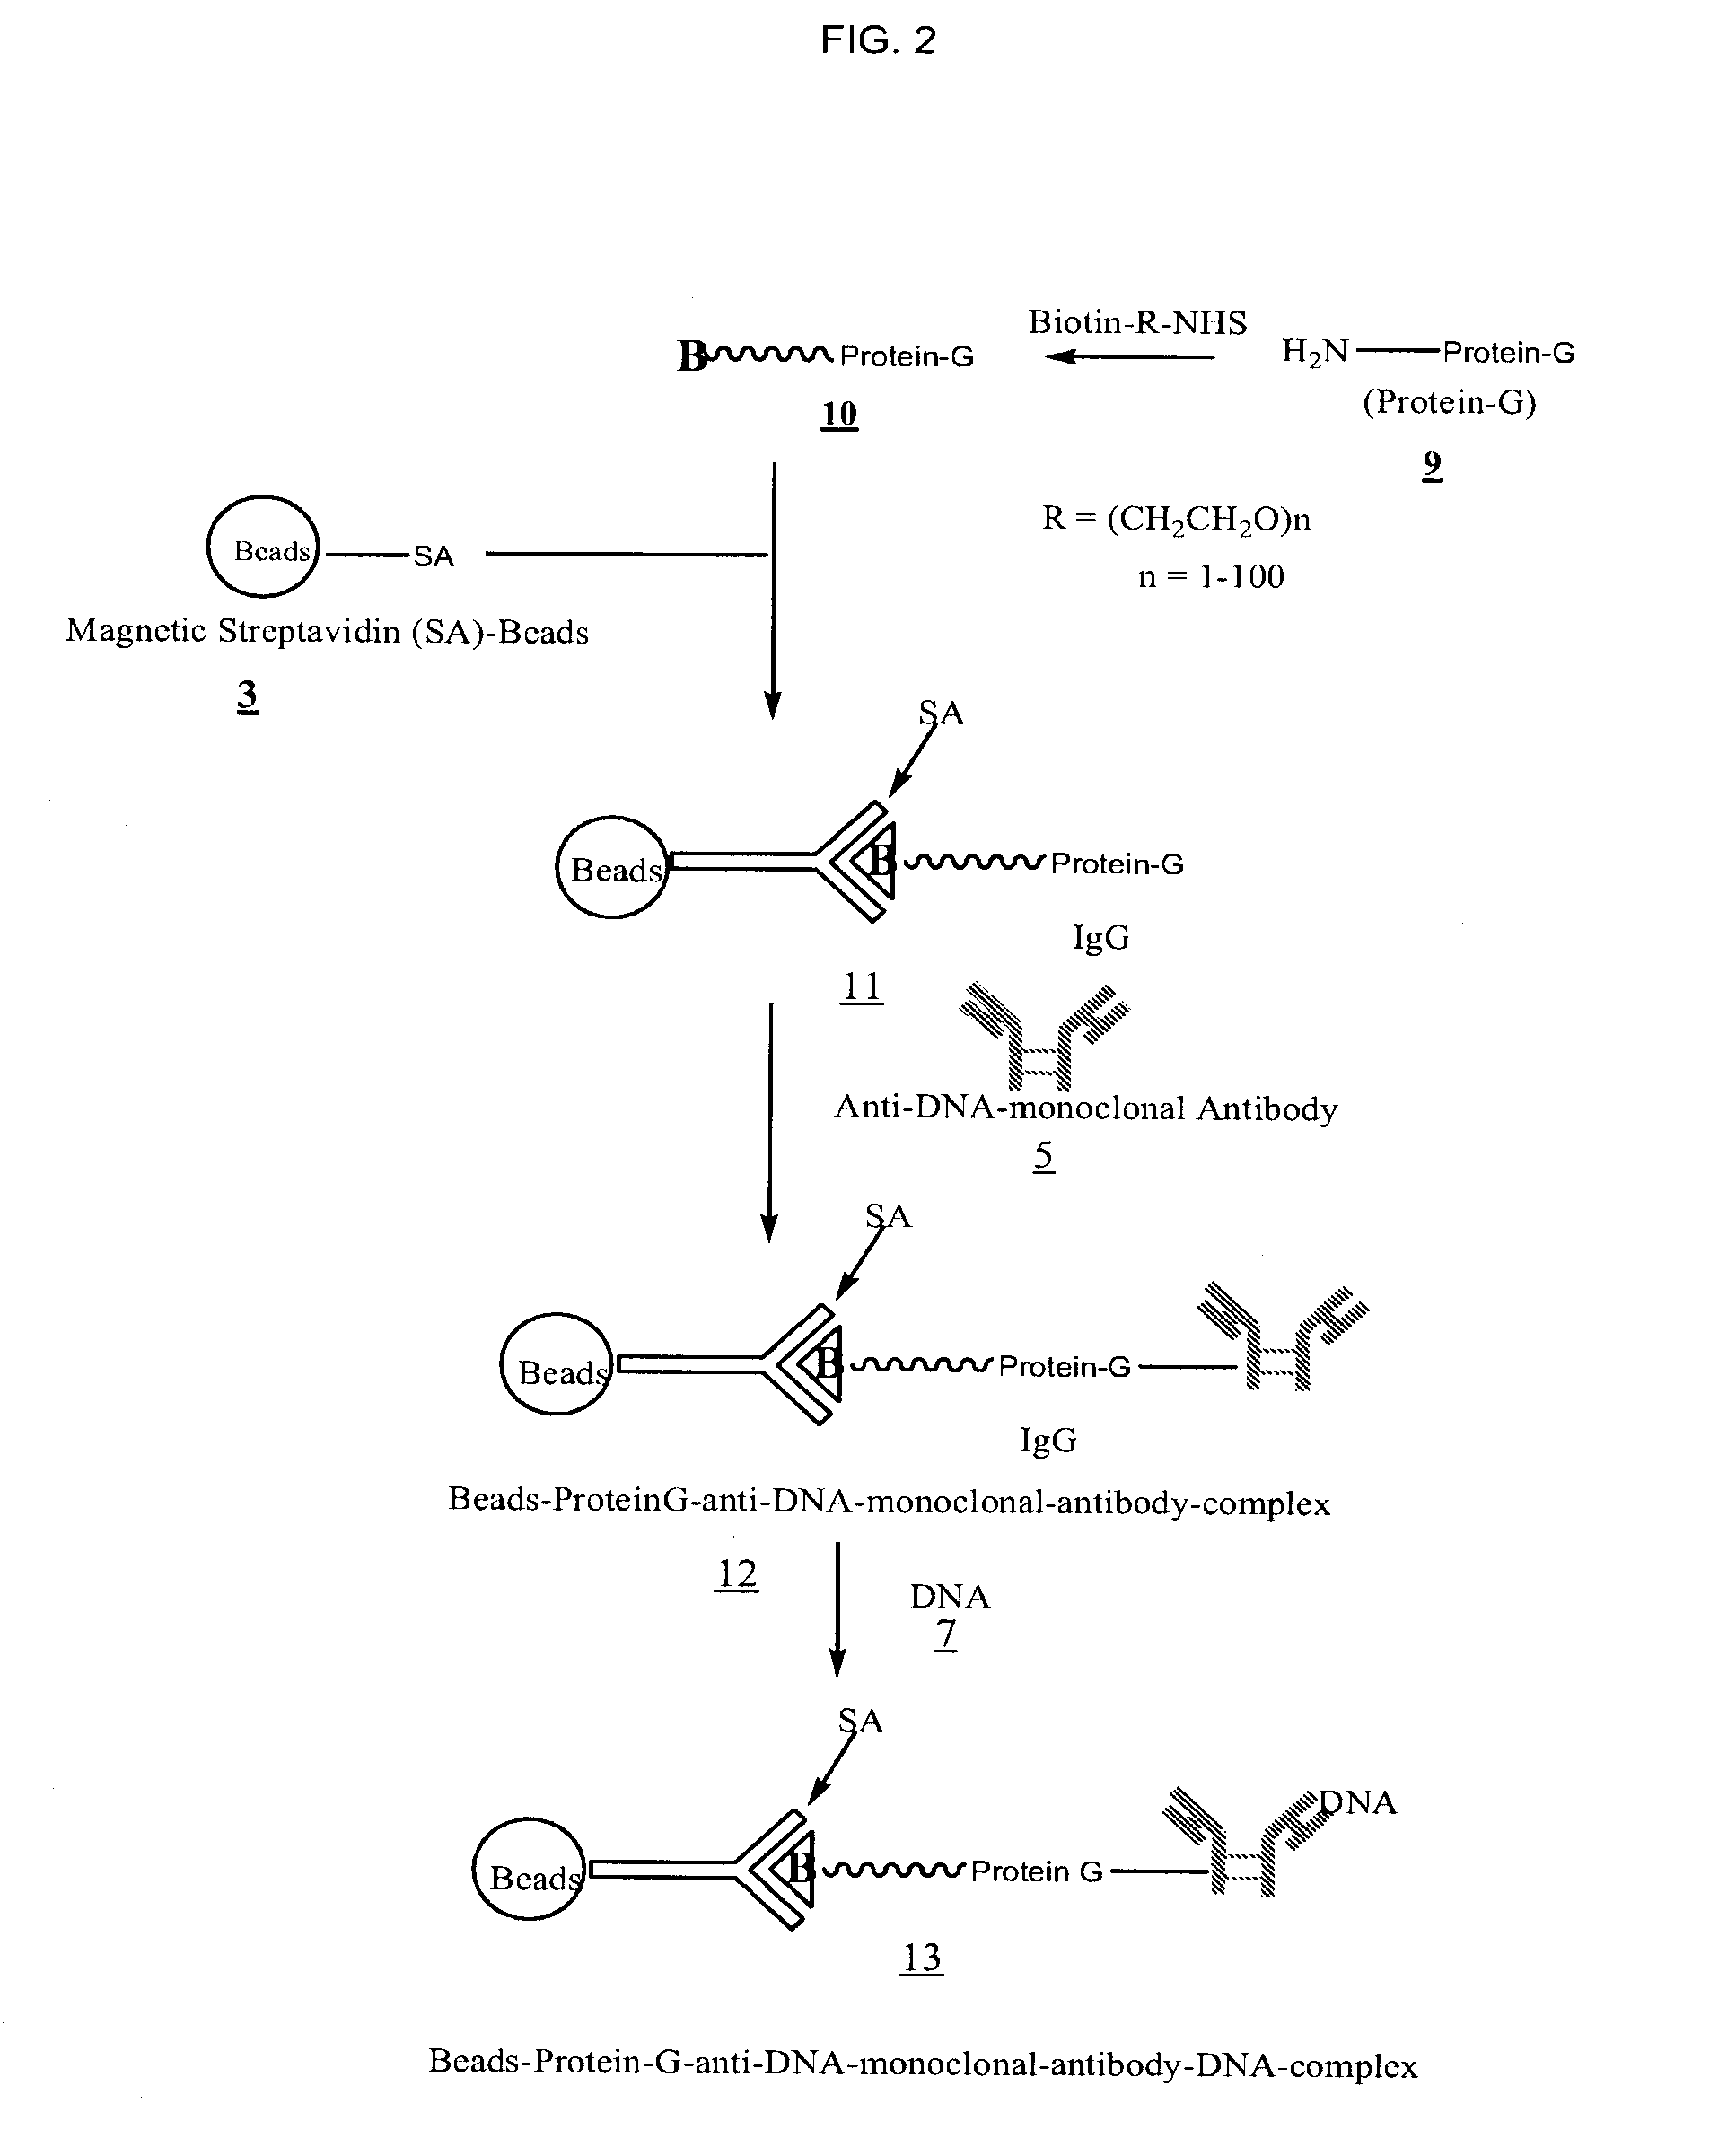 Method for isolating cell free apoptotic or fetal nucleic acids